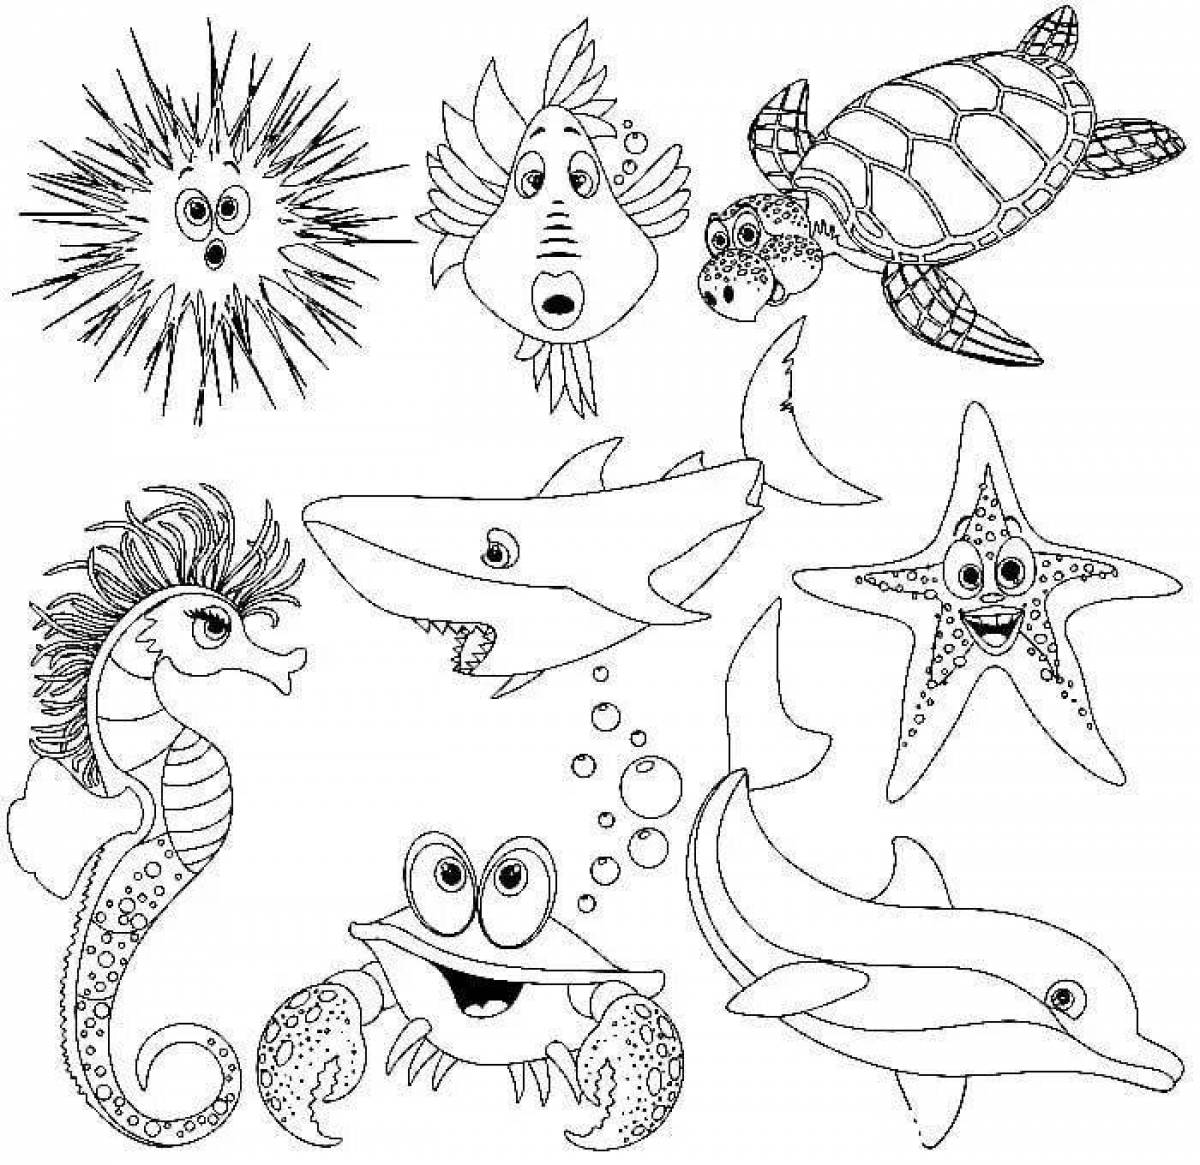 Exciting marine life coloring book for 6-7 year olds